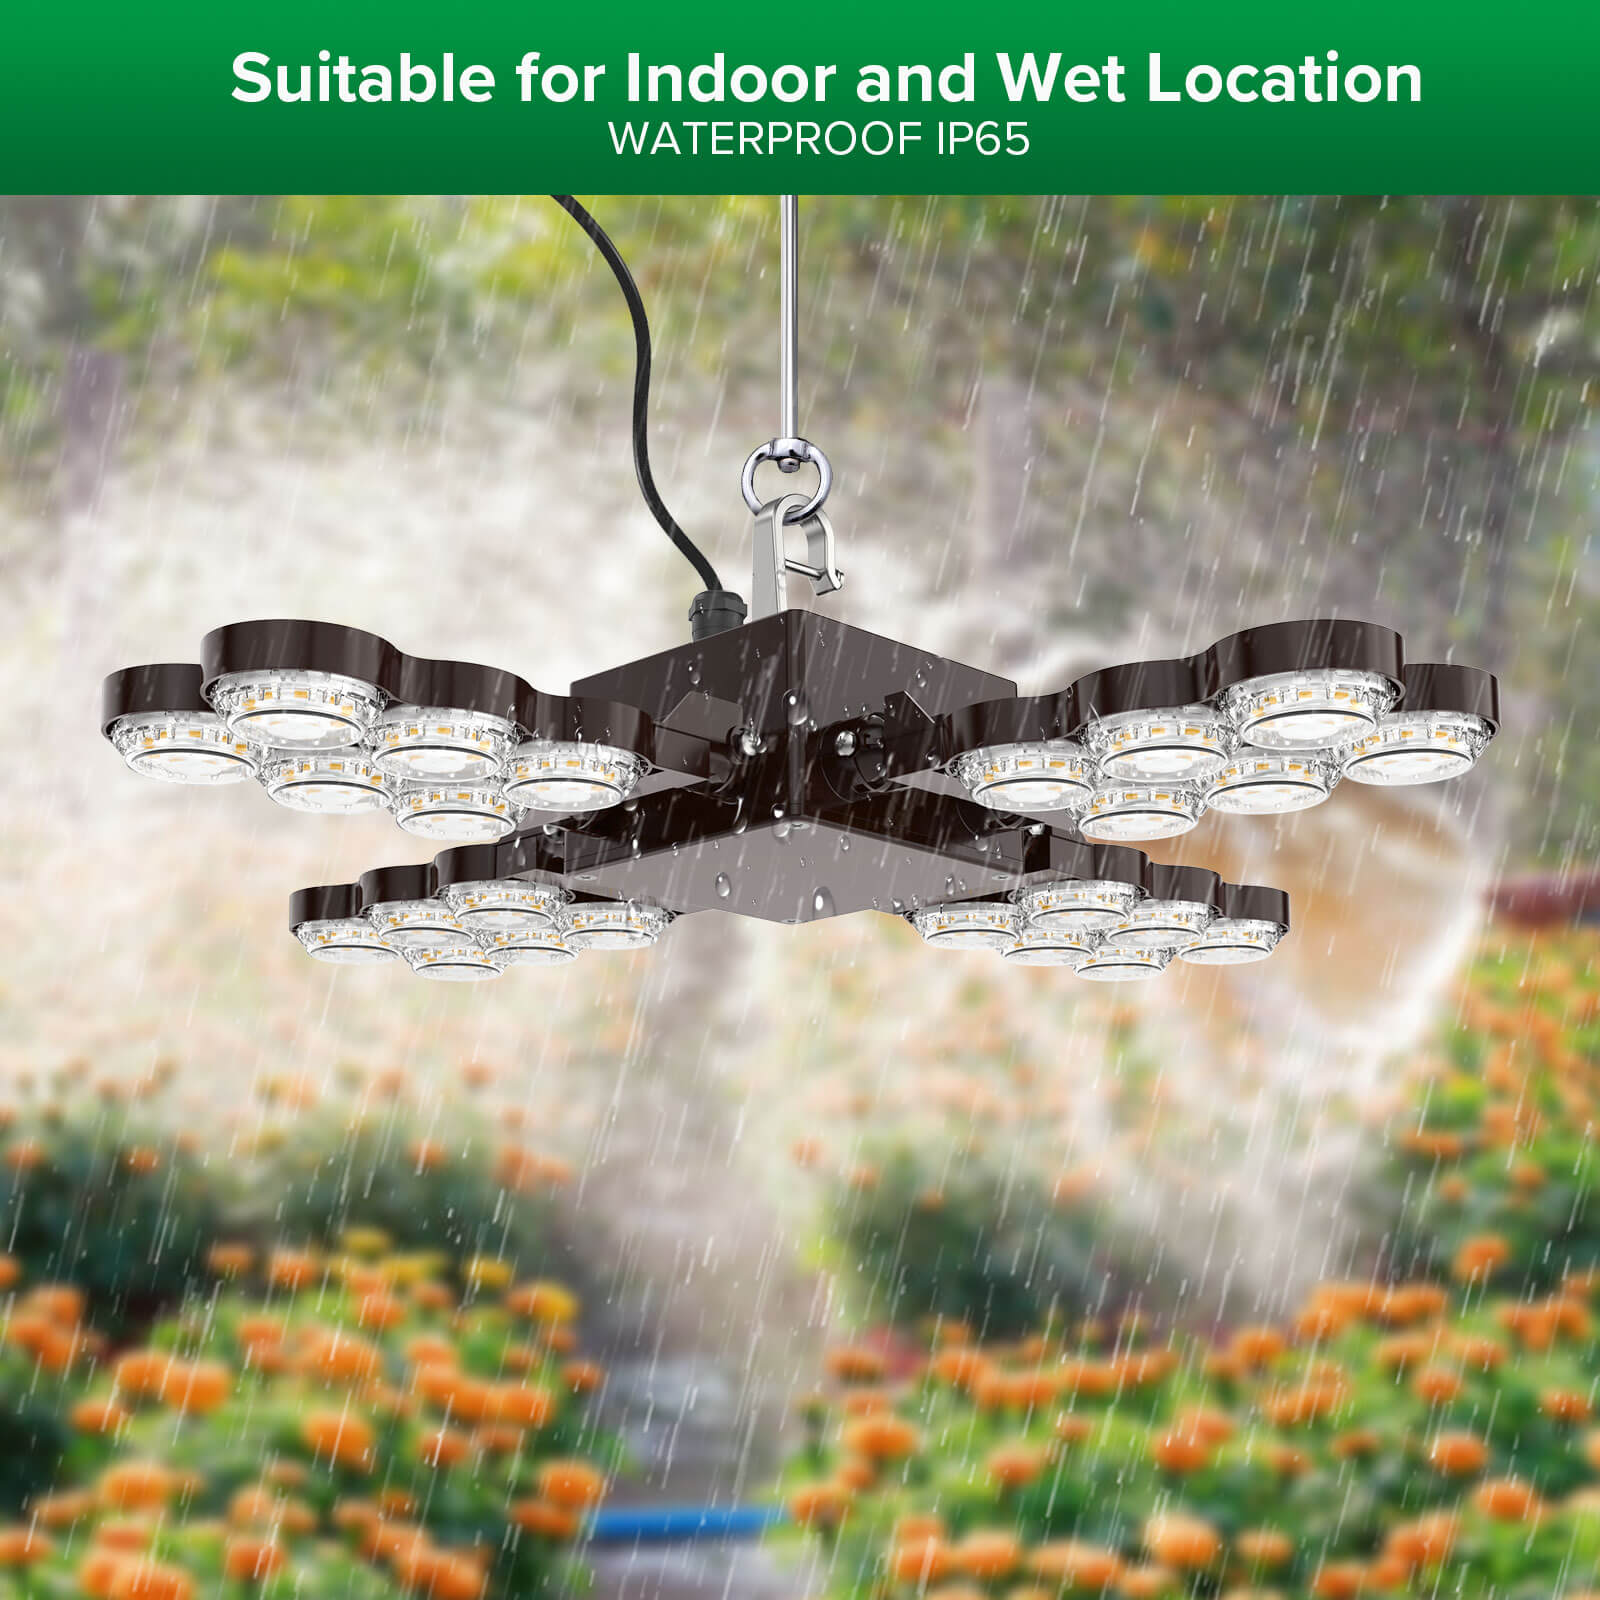 120W/220W Led Grow Light (Folding Wings) suitable for indoor and wet location, IP65